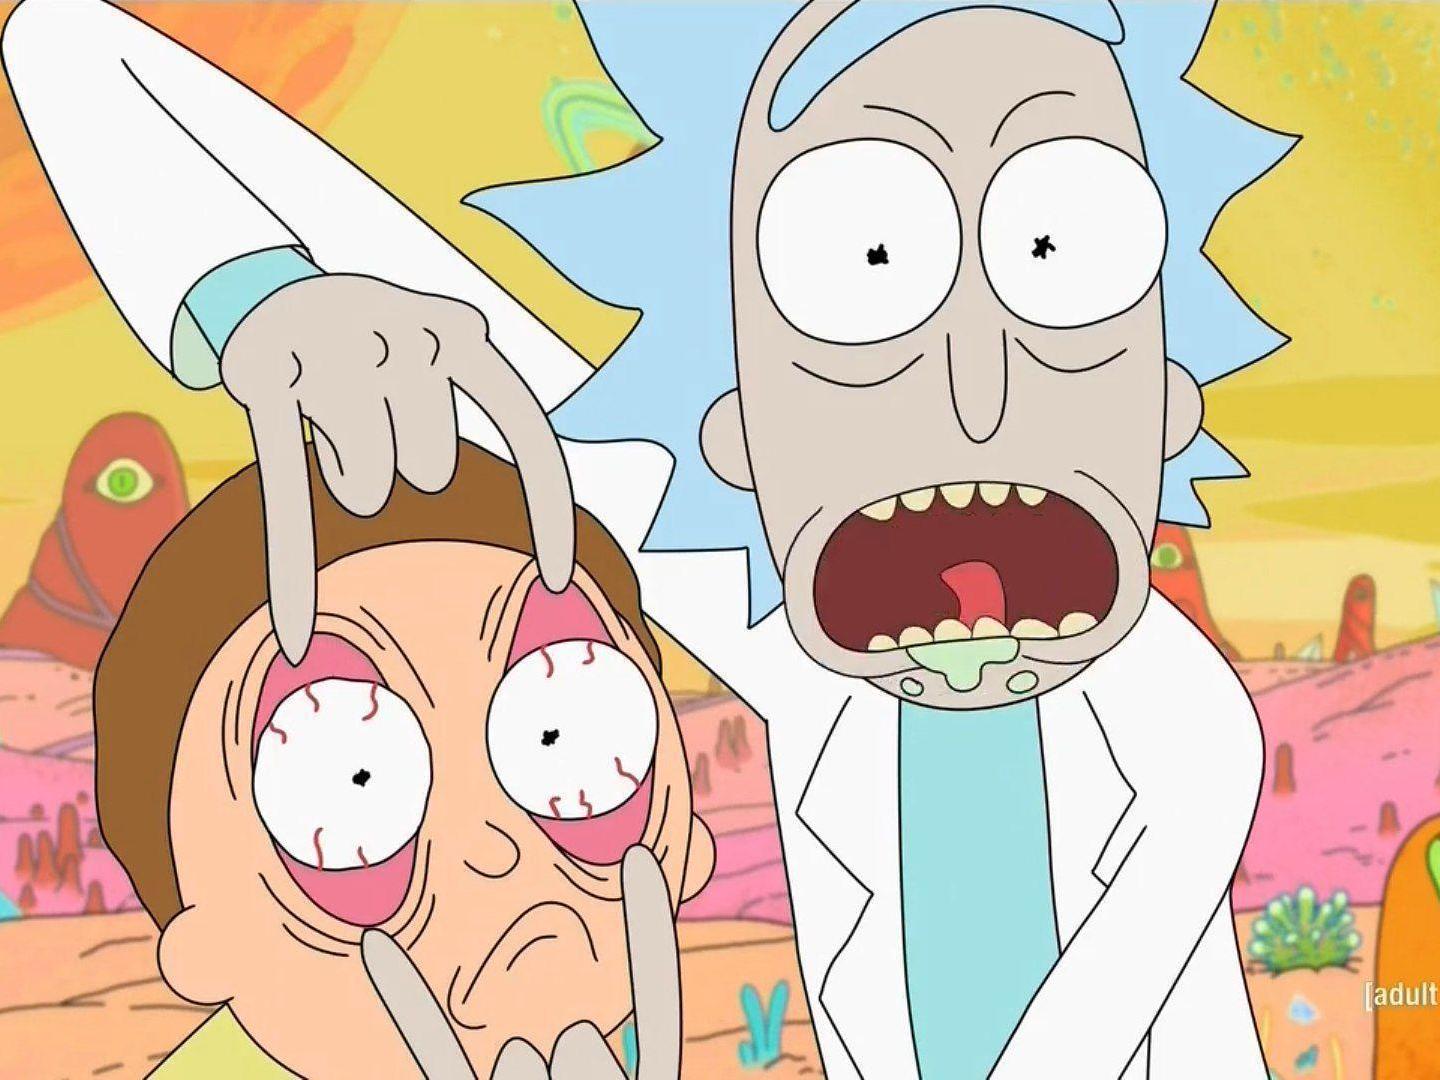 Rick Morty Has More Deaths Per Episode Than Any Other Show